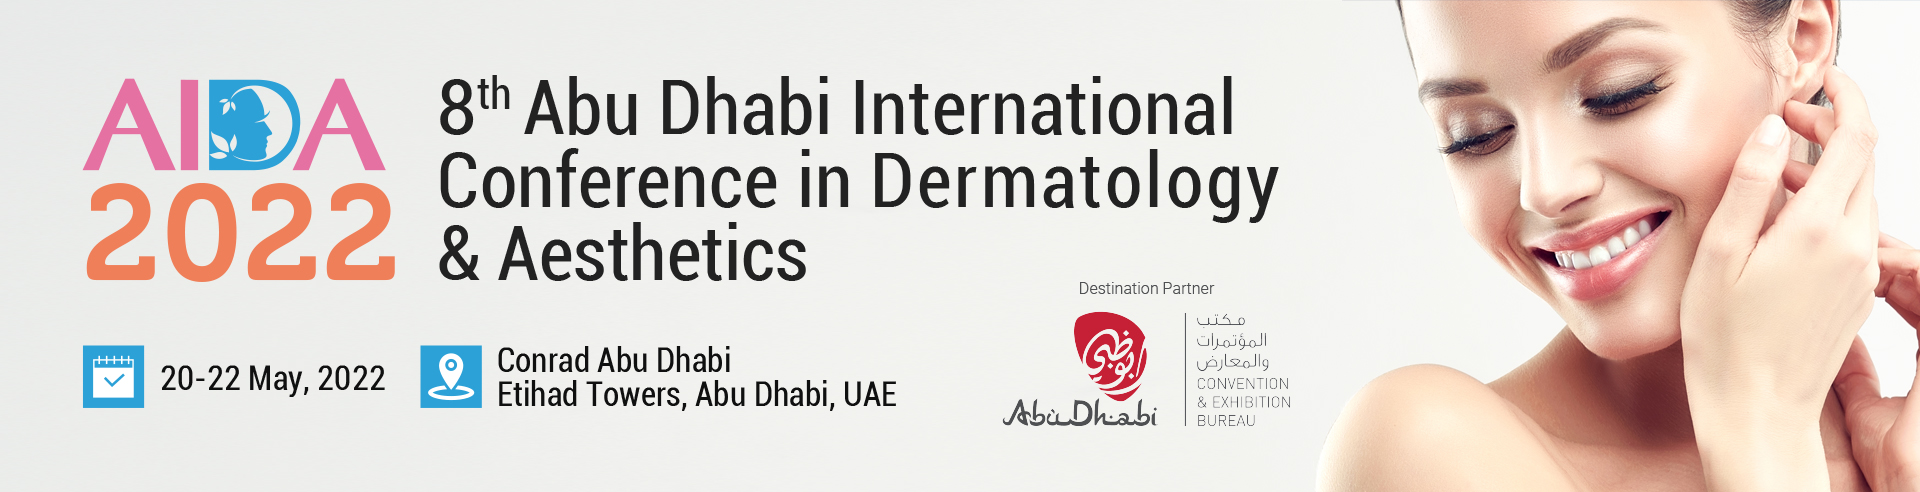 8th Abu Dhabi International Conference in Dermatology and Aesthetics